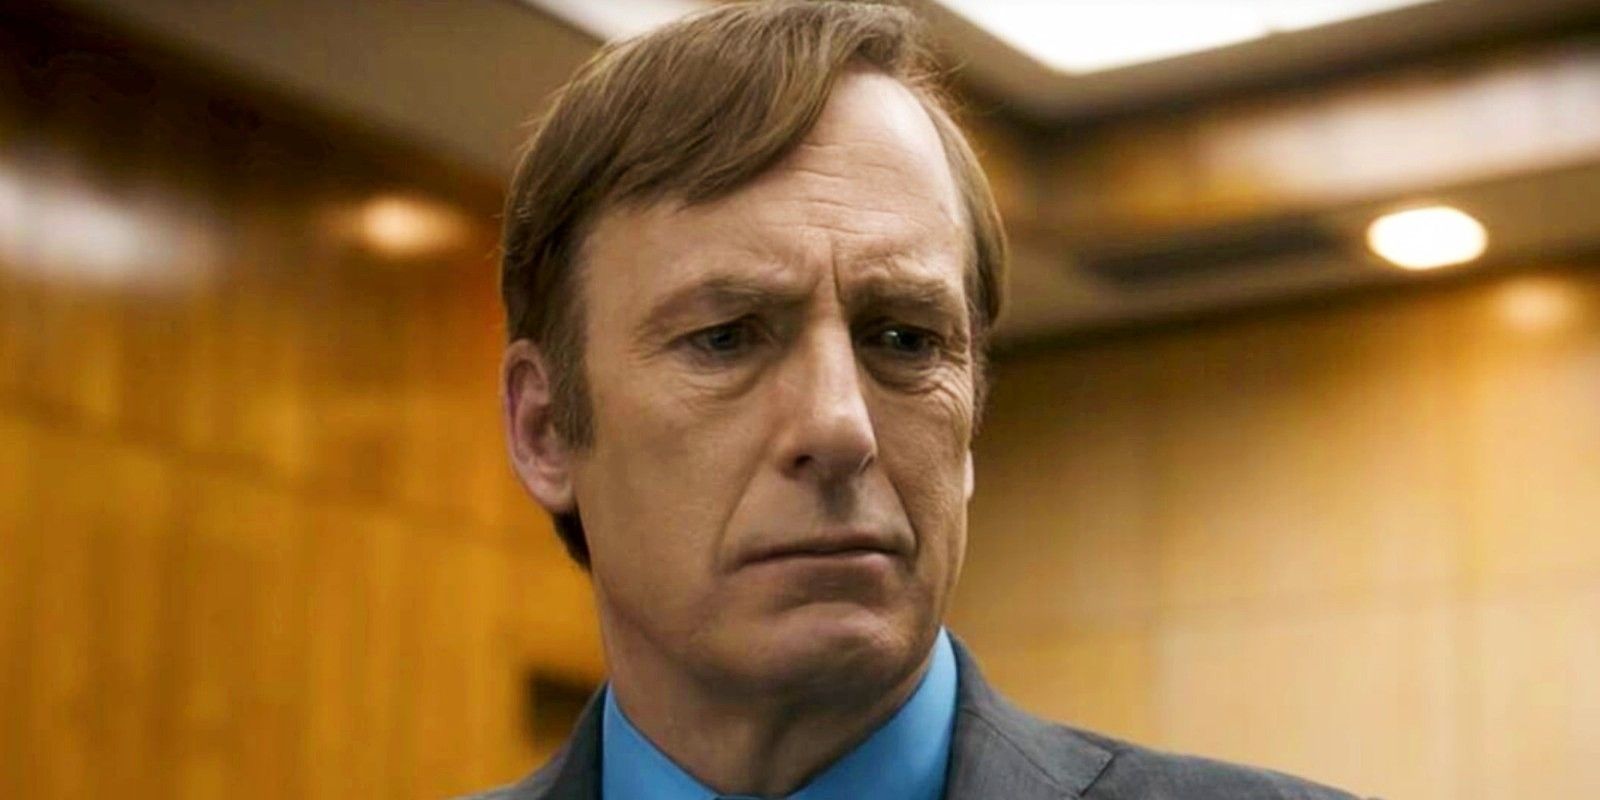 Jimmy looking sad in court in Better Call Saul